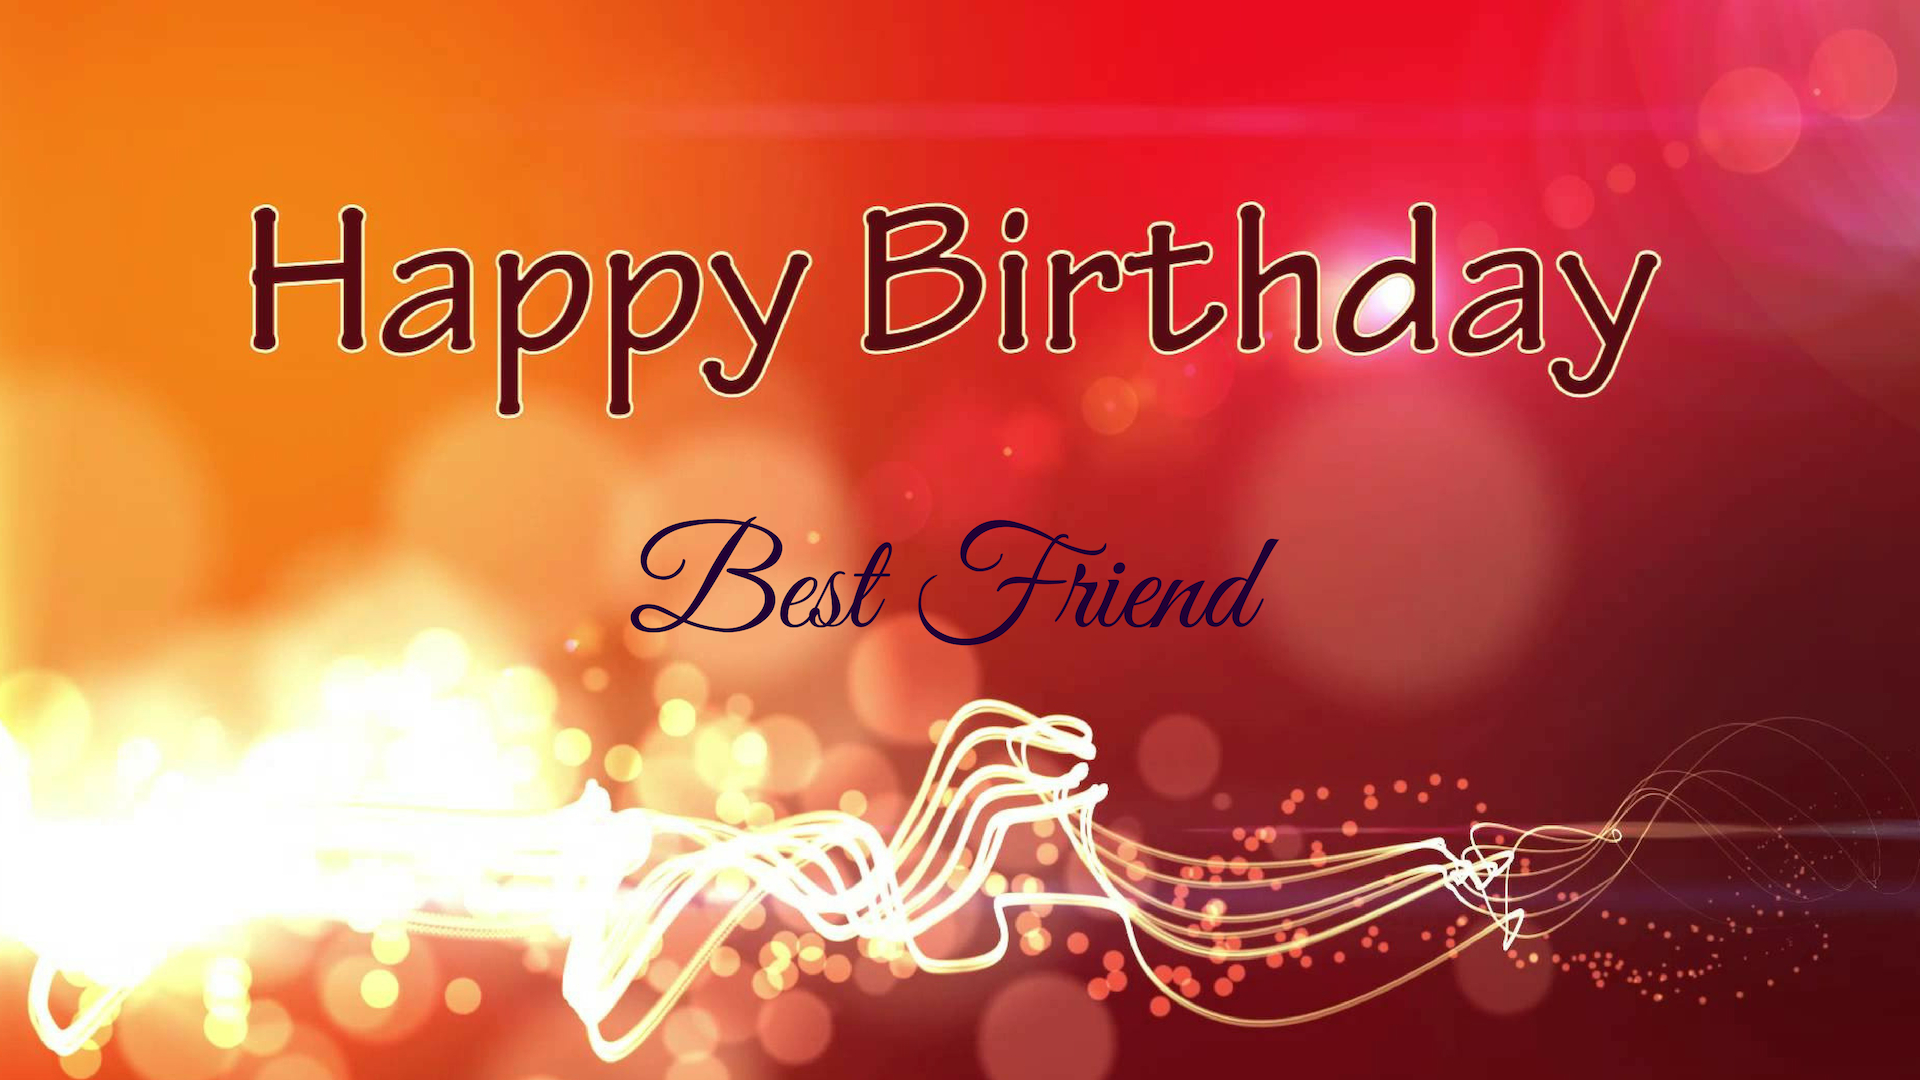 birthday-wishes-for-best-friend-background-the-cake-boutique